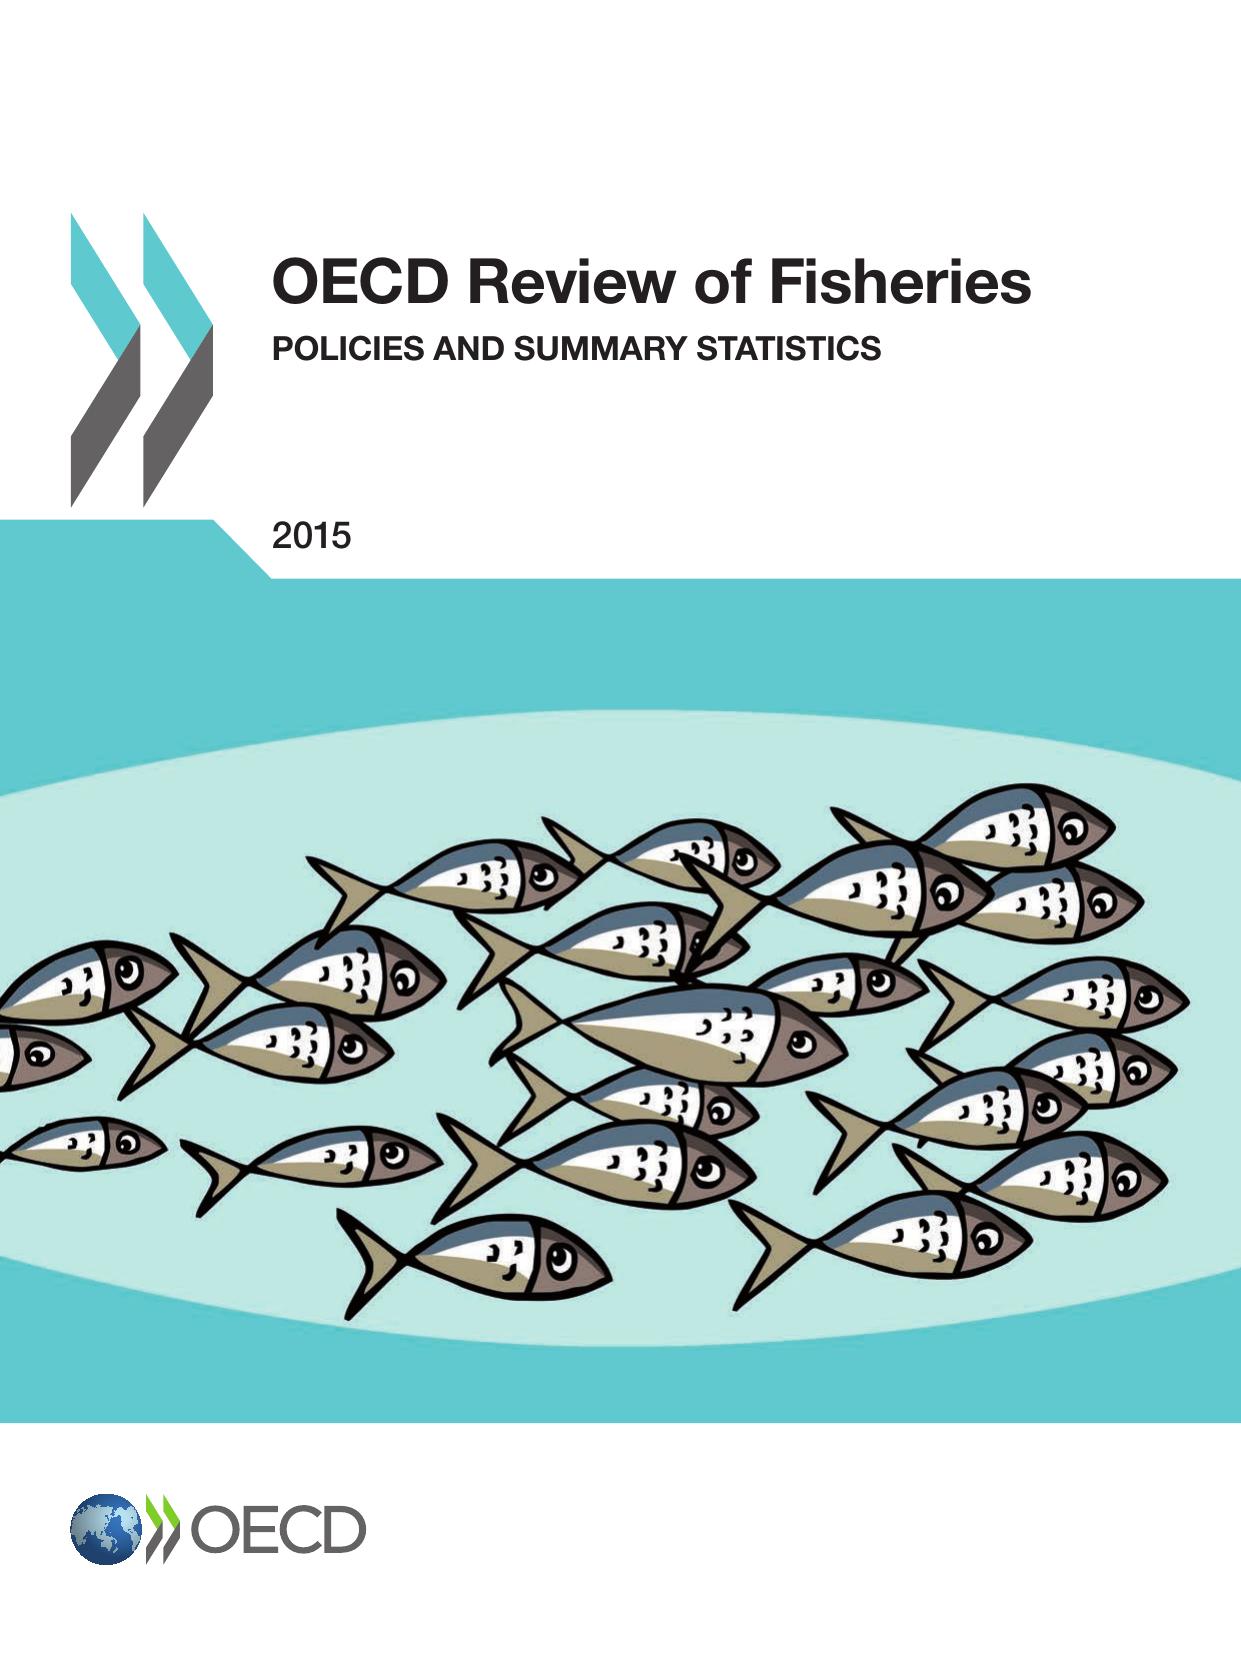 OECD Review of Fisheries   Policies and Summary Statistics 2015.-OECD (2015)